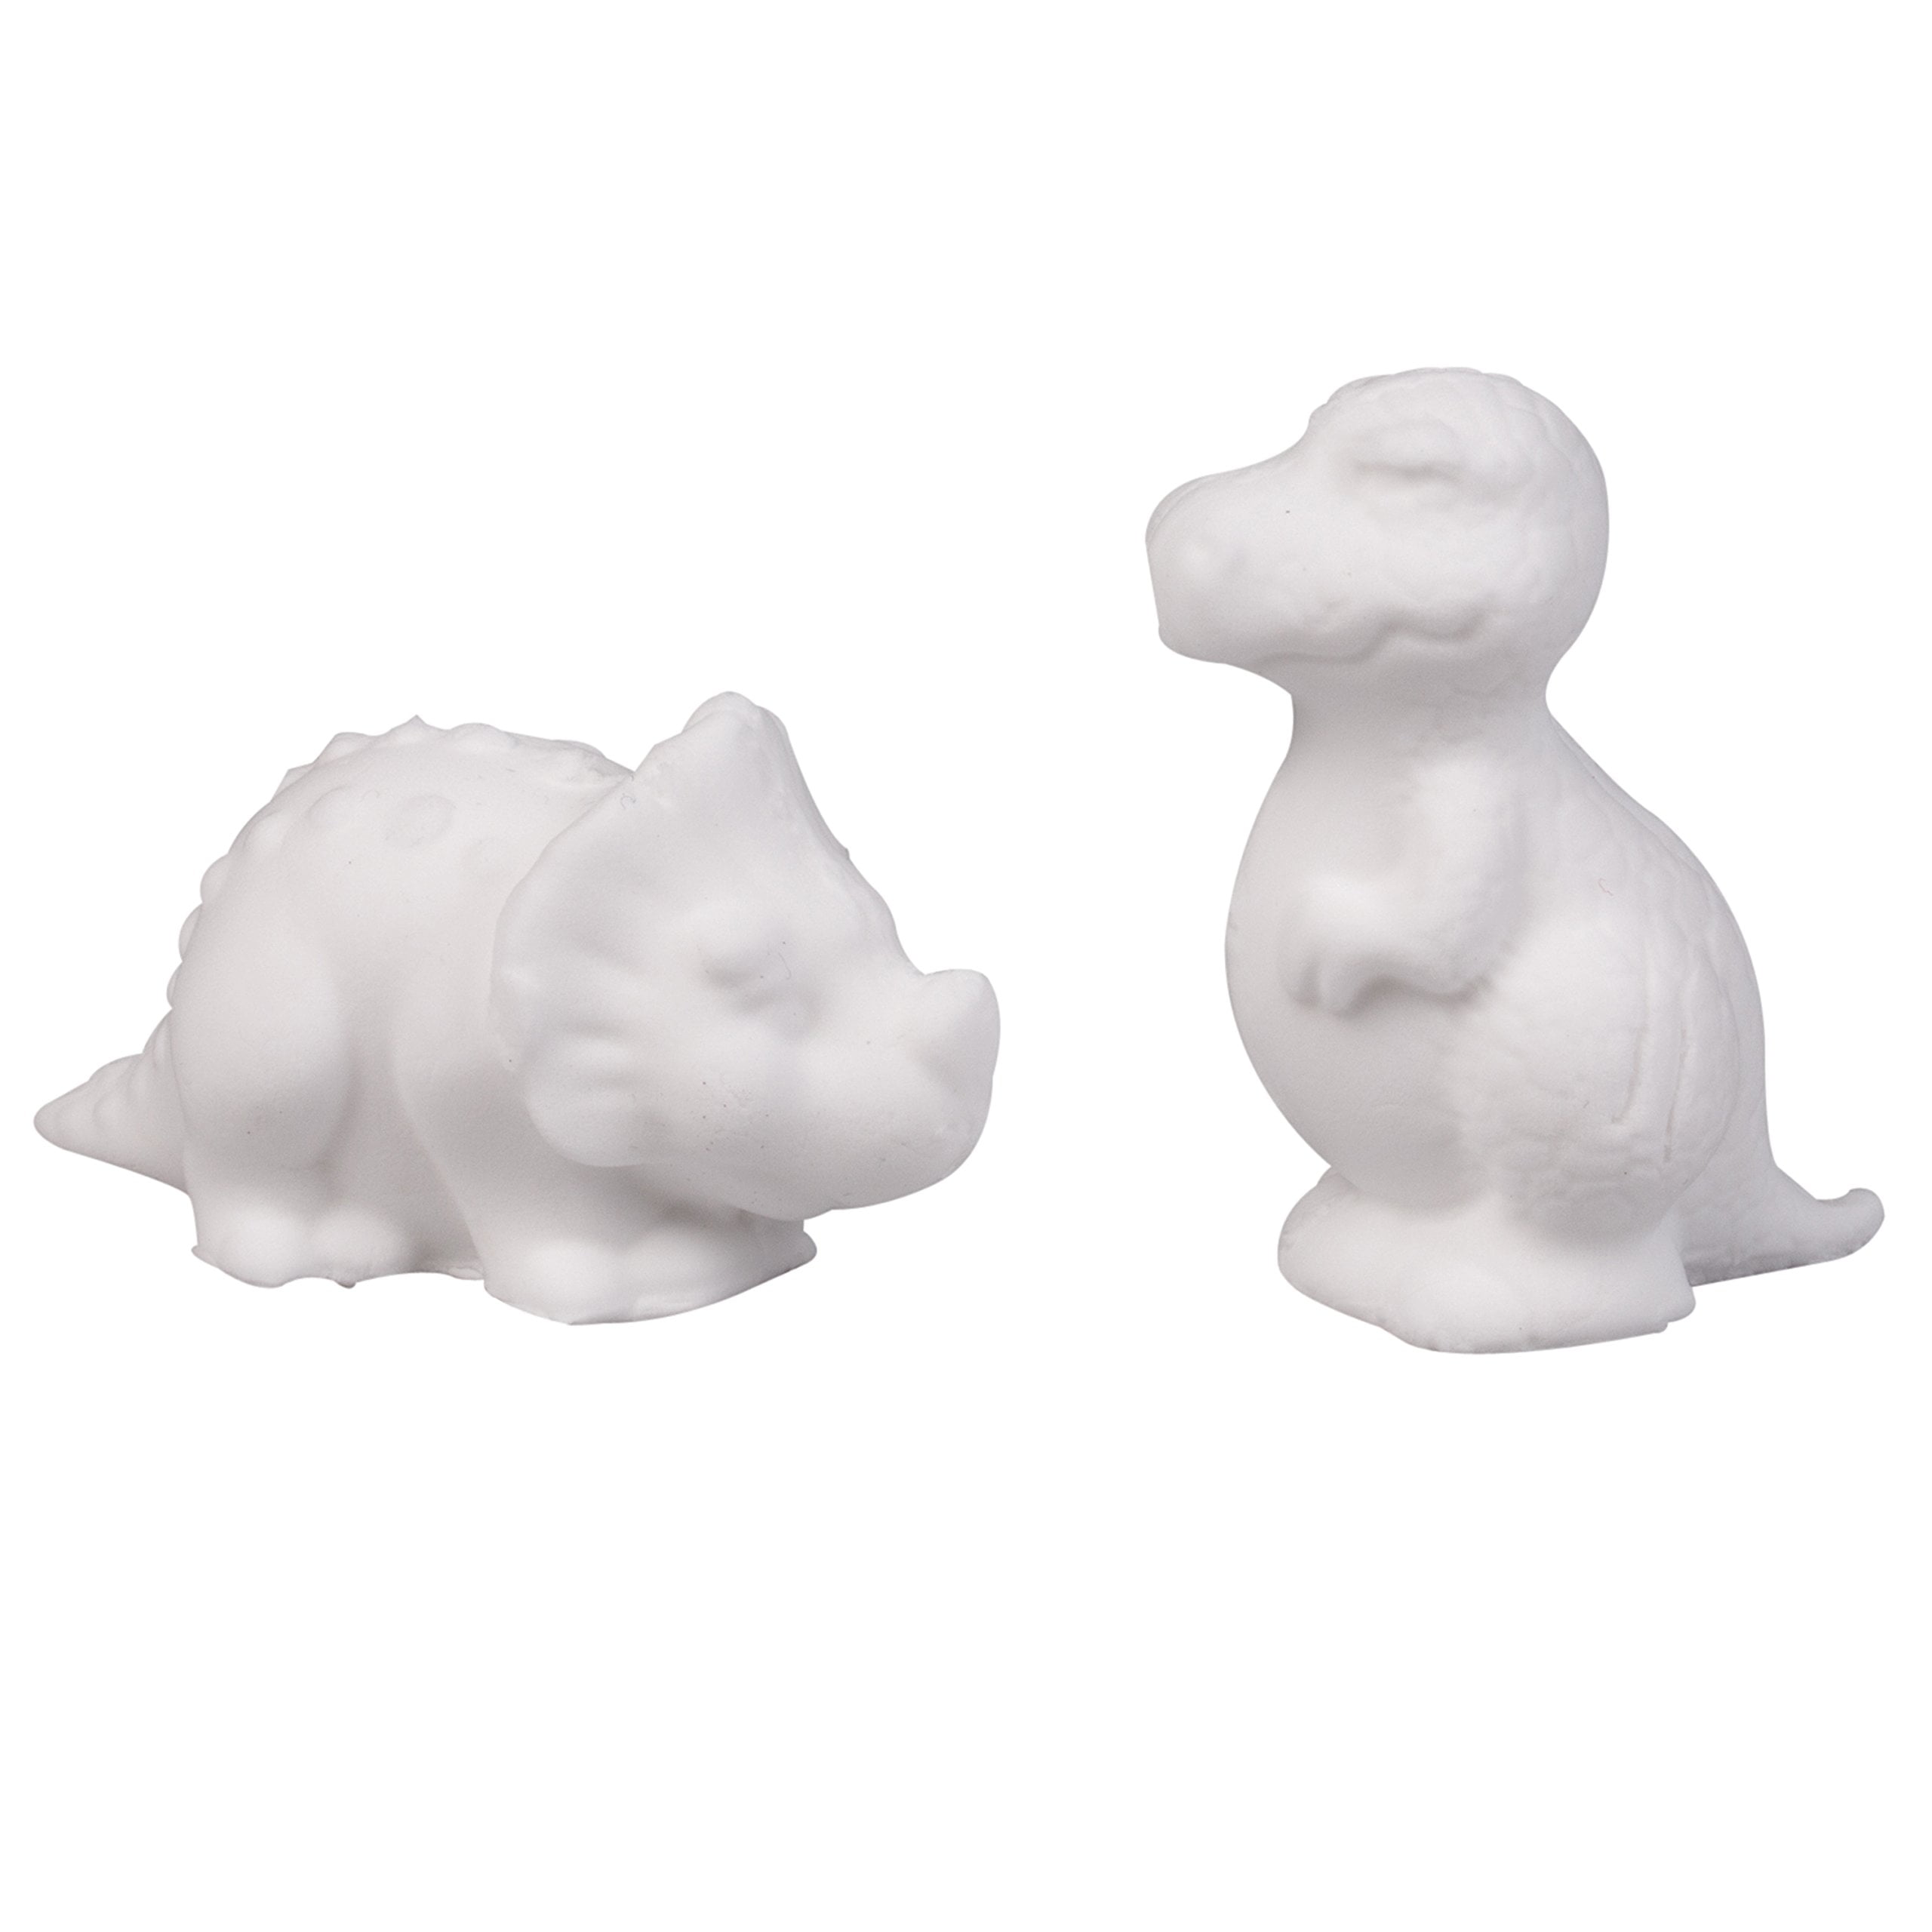 Play Visions Floof Modeling Clay- Reusable Indoor Snow - Endless Creations  Possible, Mold Any Shape Or Design - 240 Grams.